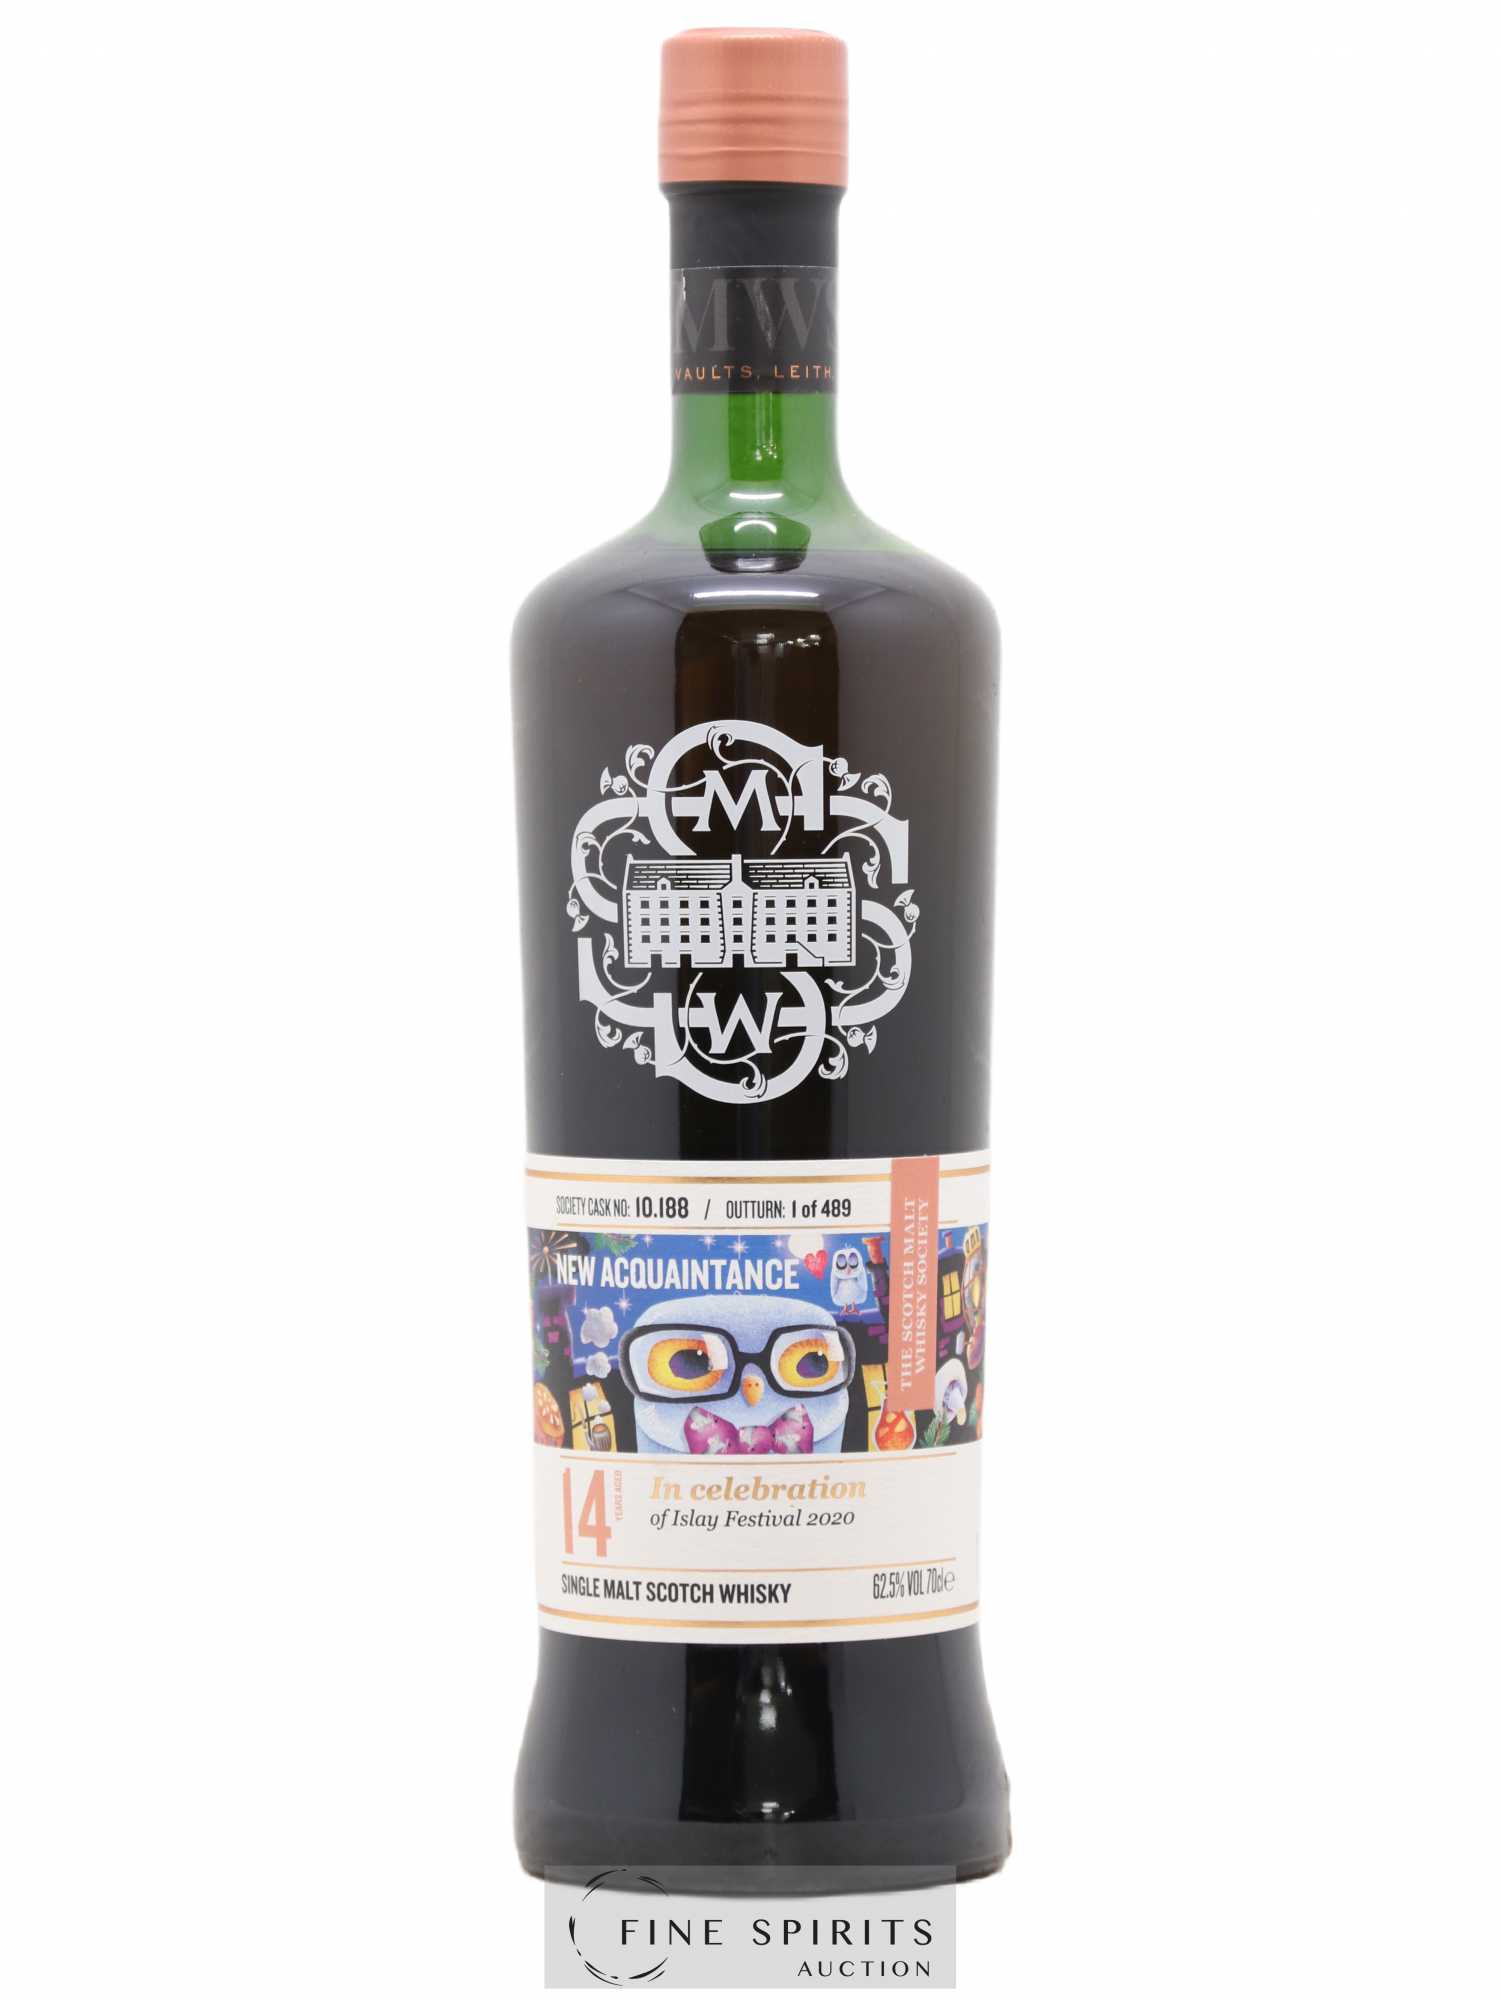 New Acquaintance 14 years The Scotch Malt Whisky Society In Celebration of Islay Festival 2020 Cask n°10.188 - One of 489